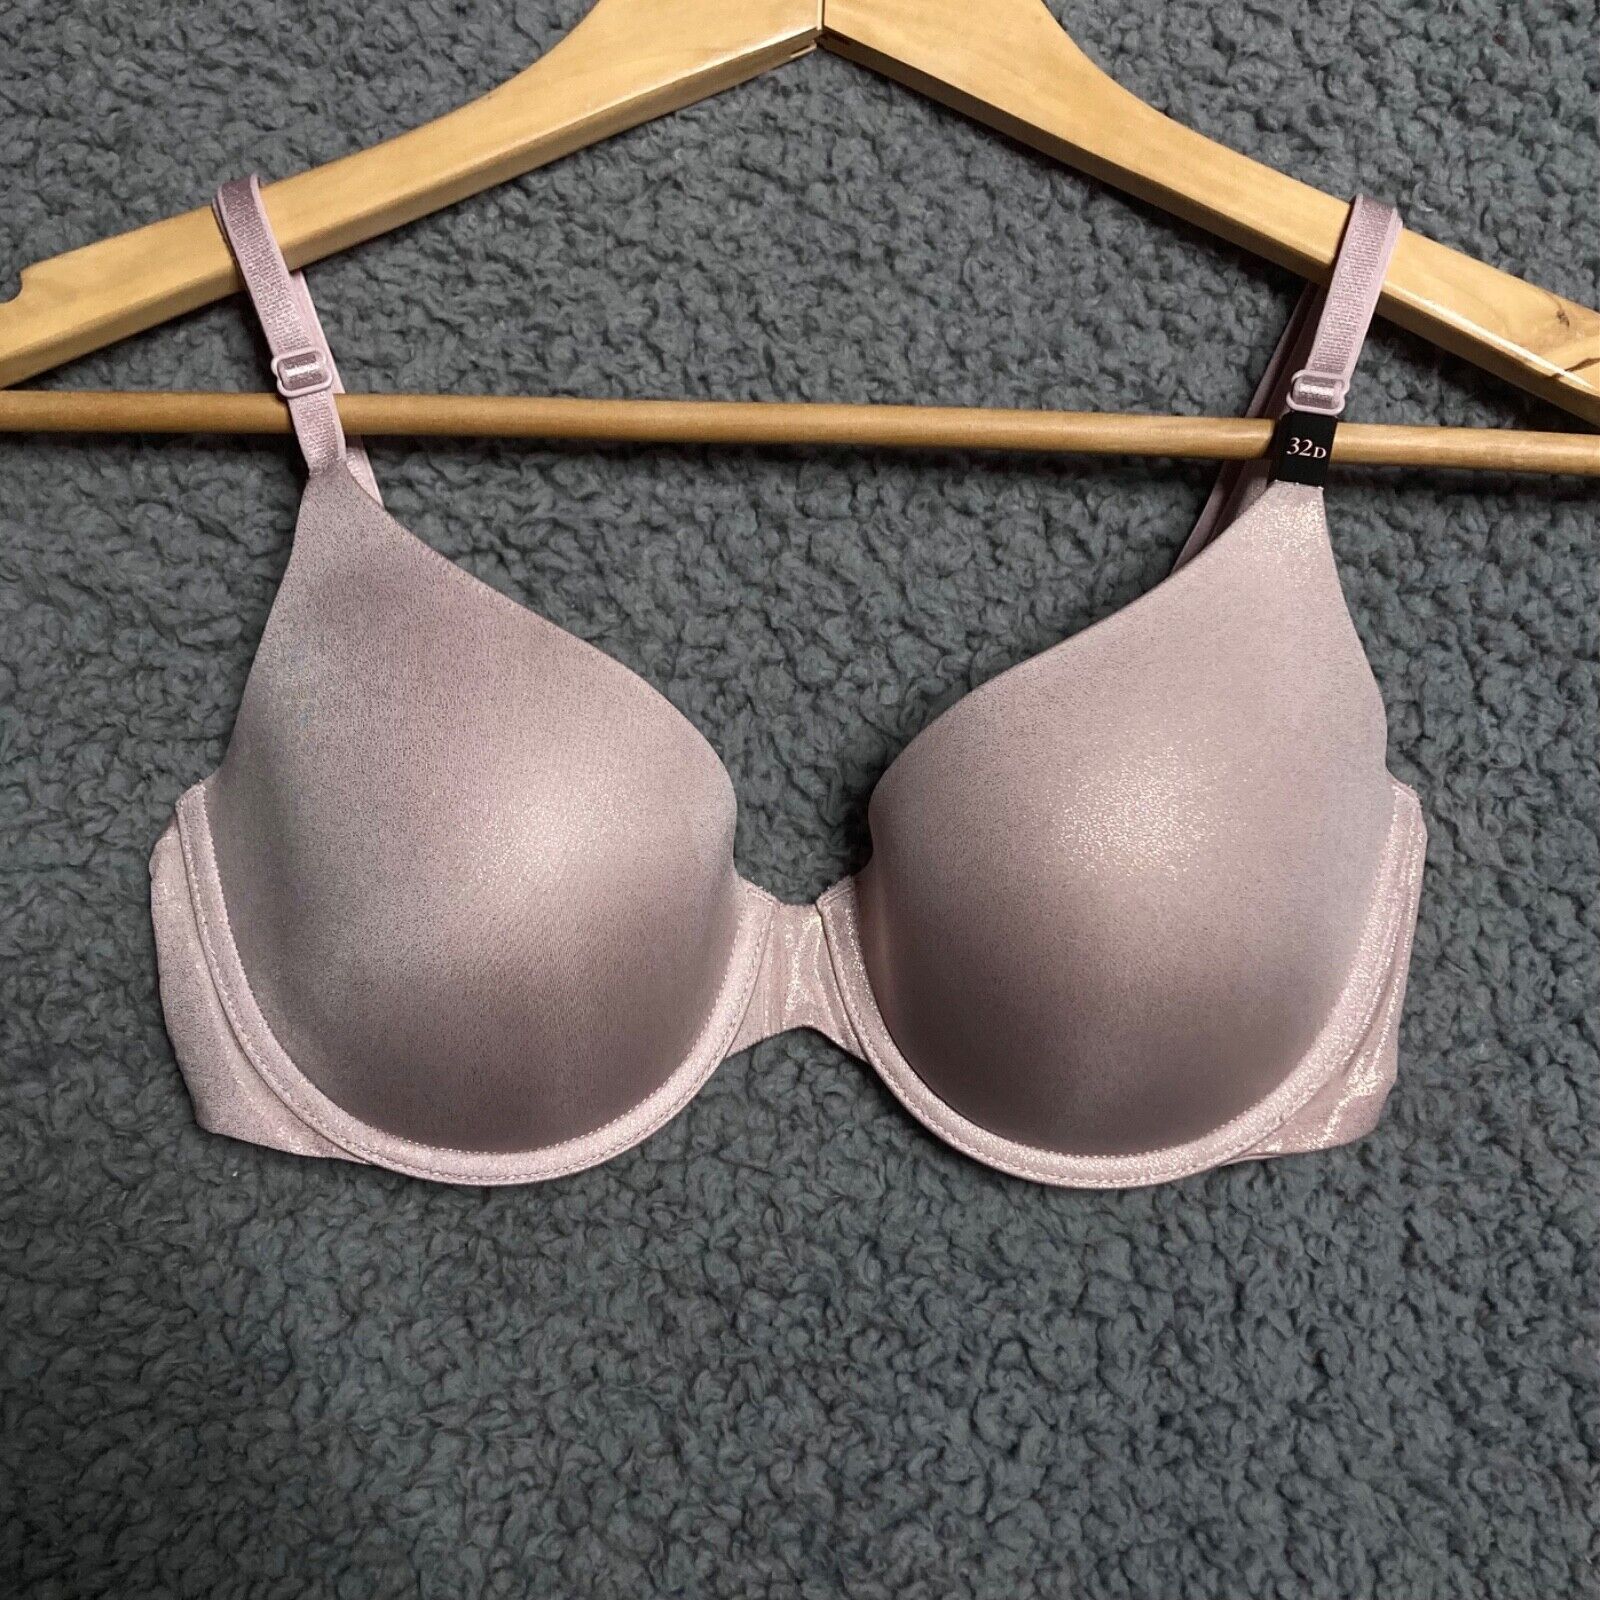 Primary image for Victoria Secret Uplift Semi Demi Shimmer Pink Push Up Bra Padded Underwire 32D